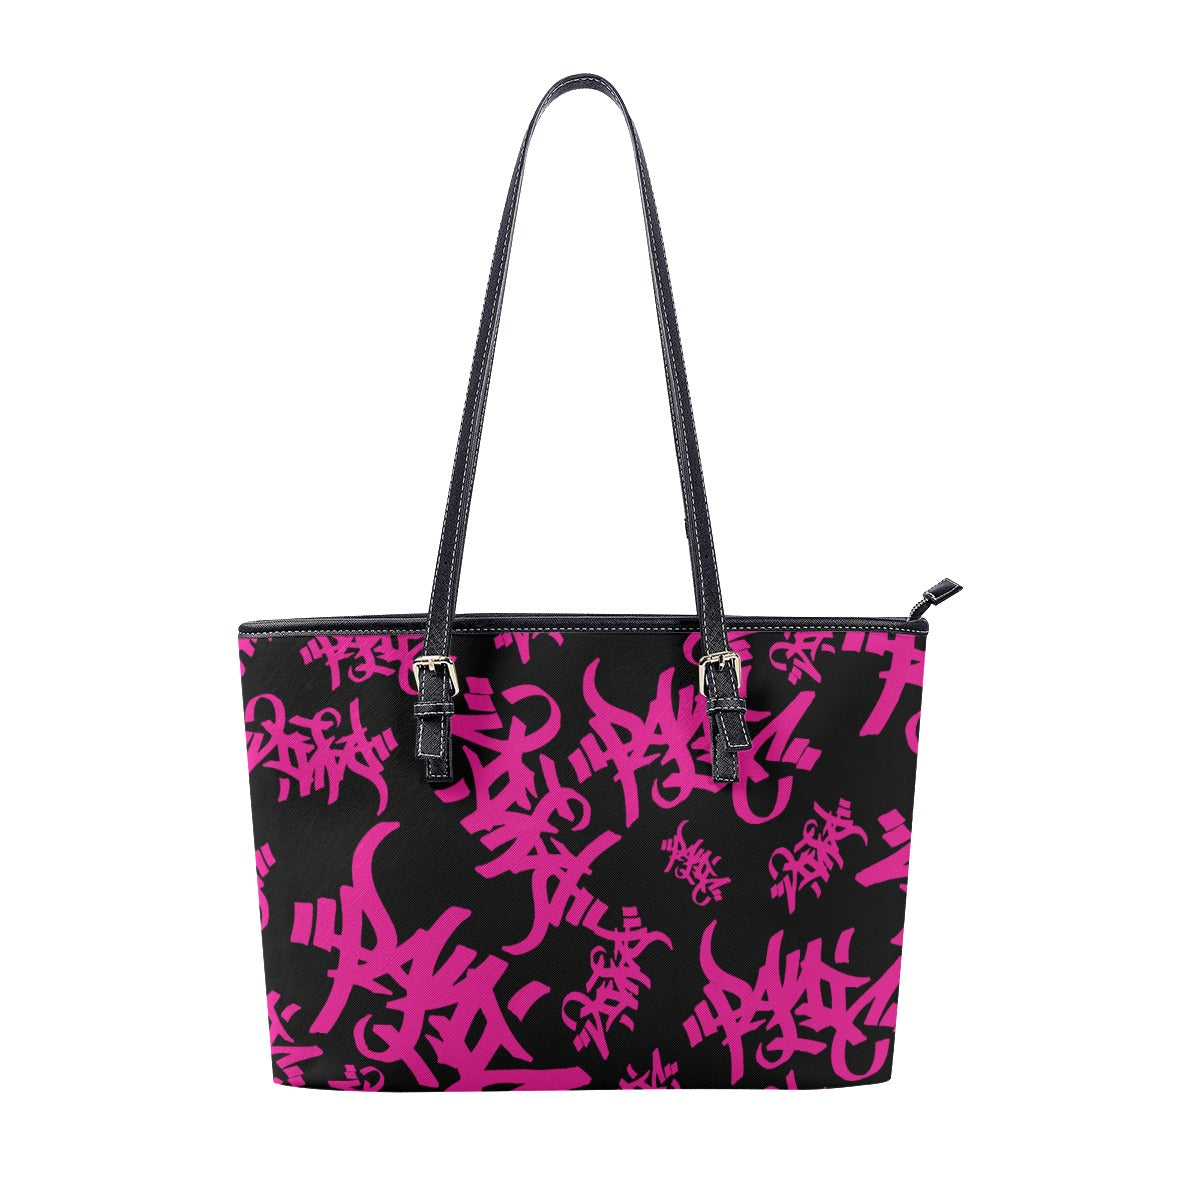 The Tag Faux Leather Tote Bag - Black/Hot Pink M / White